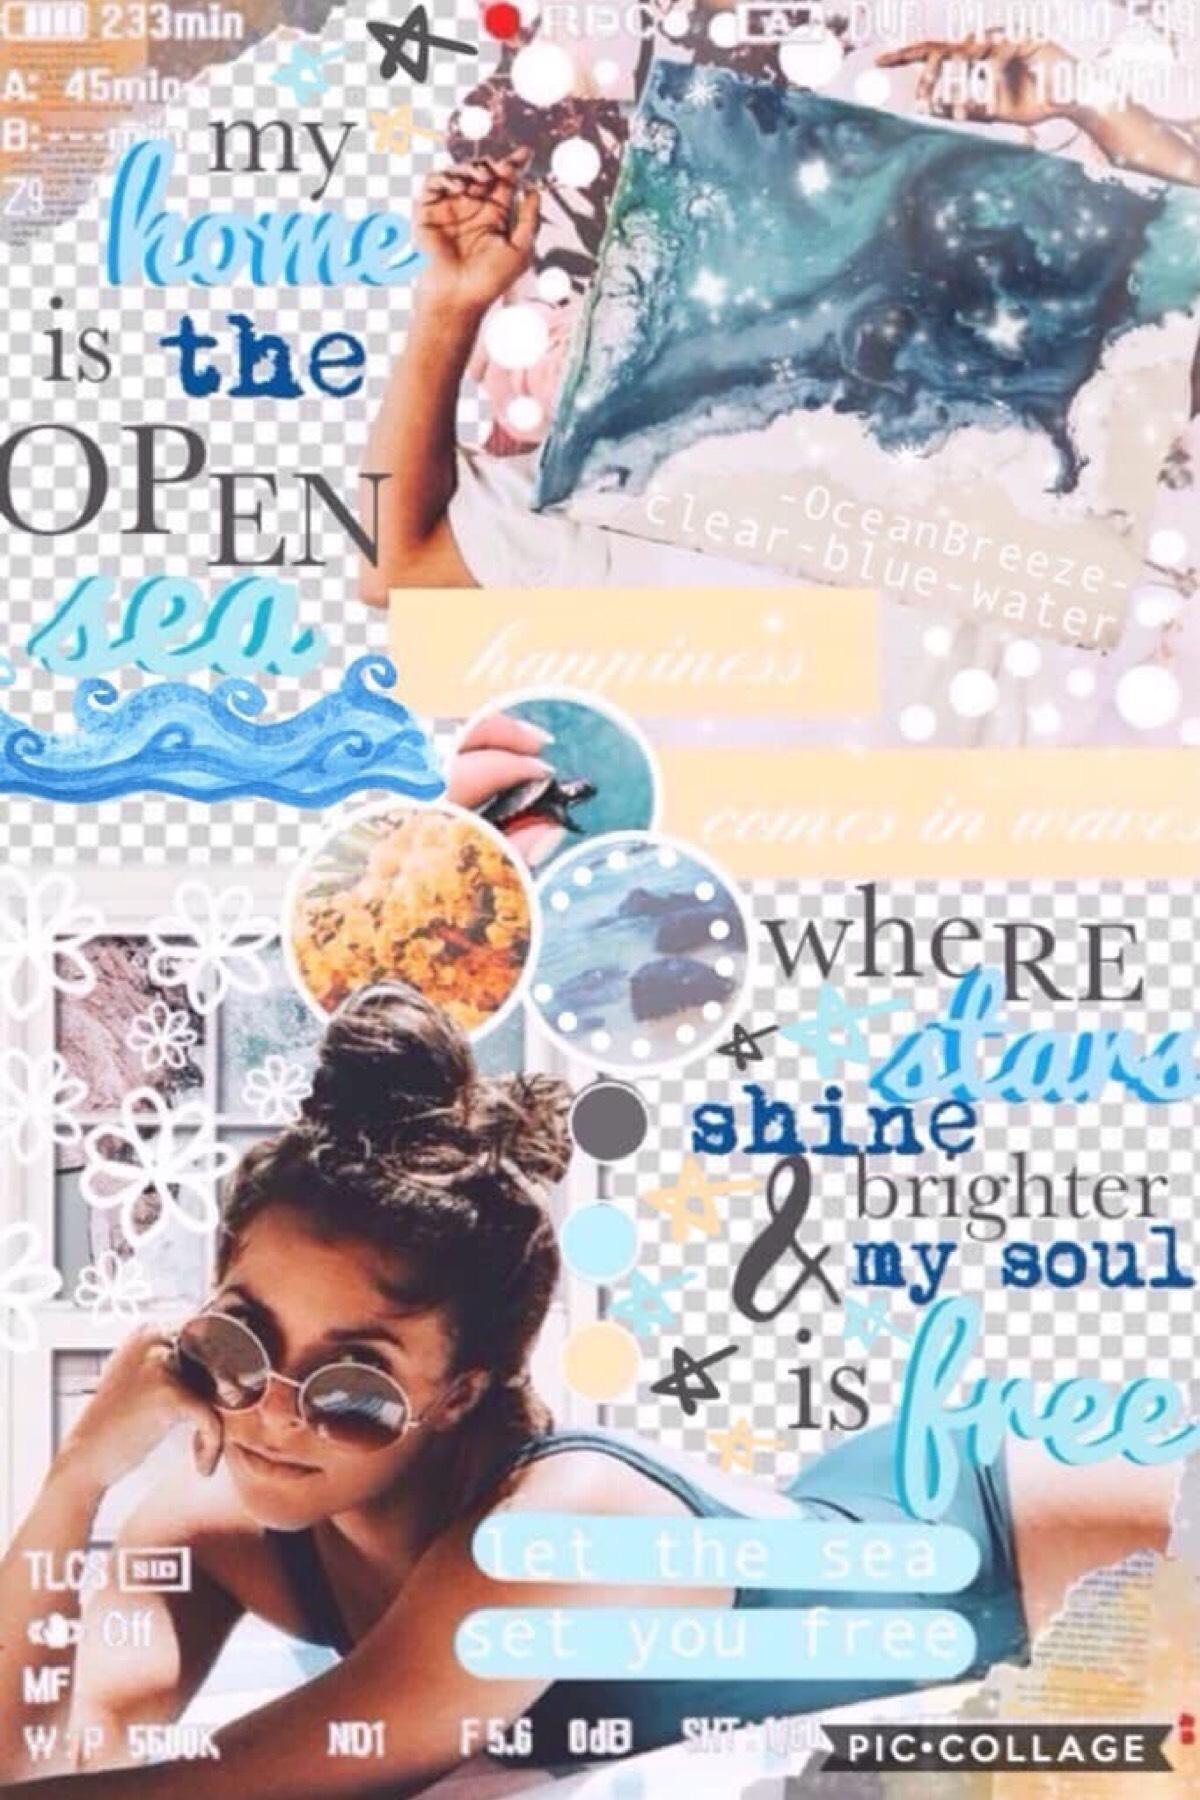 “My home is the open sea where stars shine brighter & my souls is free.”
Collab with the gorgeous Sarah clear-blue-water. She did the stunning background and I did the text! Thanks all for the support on my latest post xx Love you all xoxo 